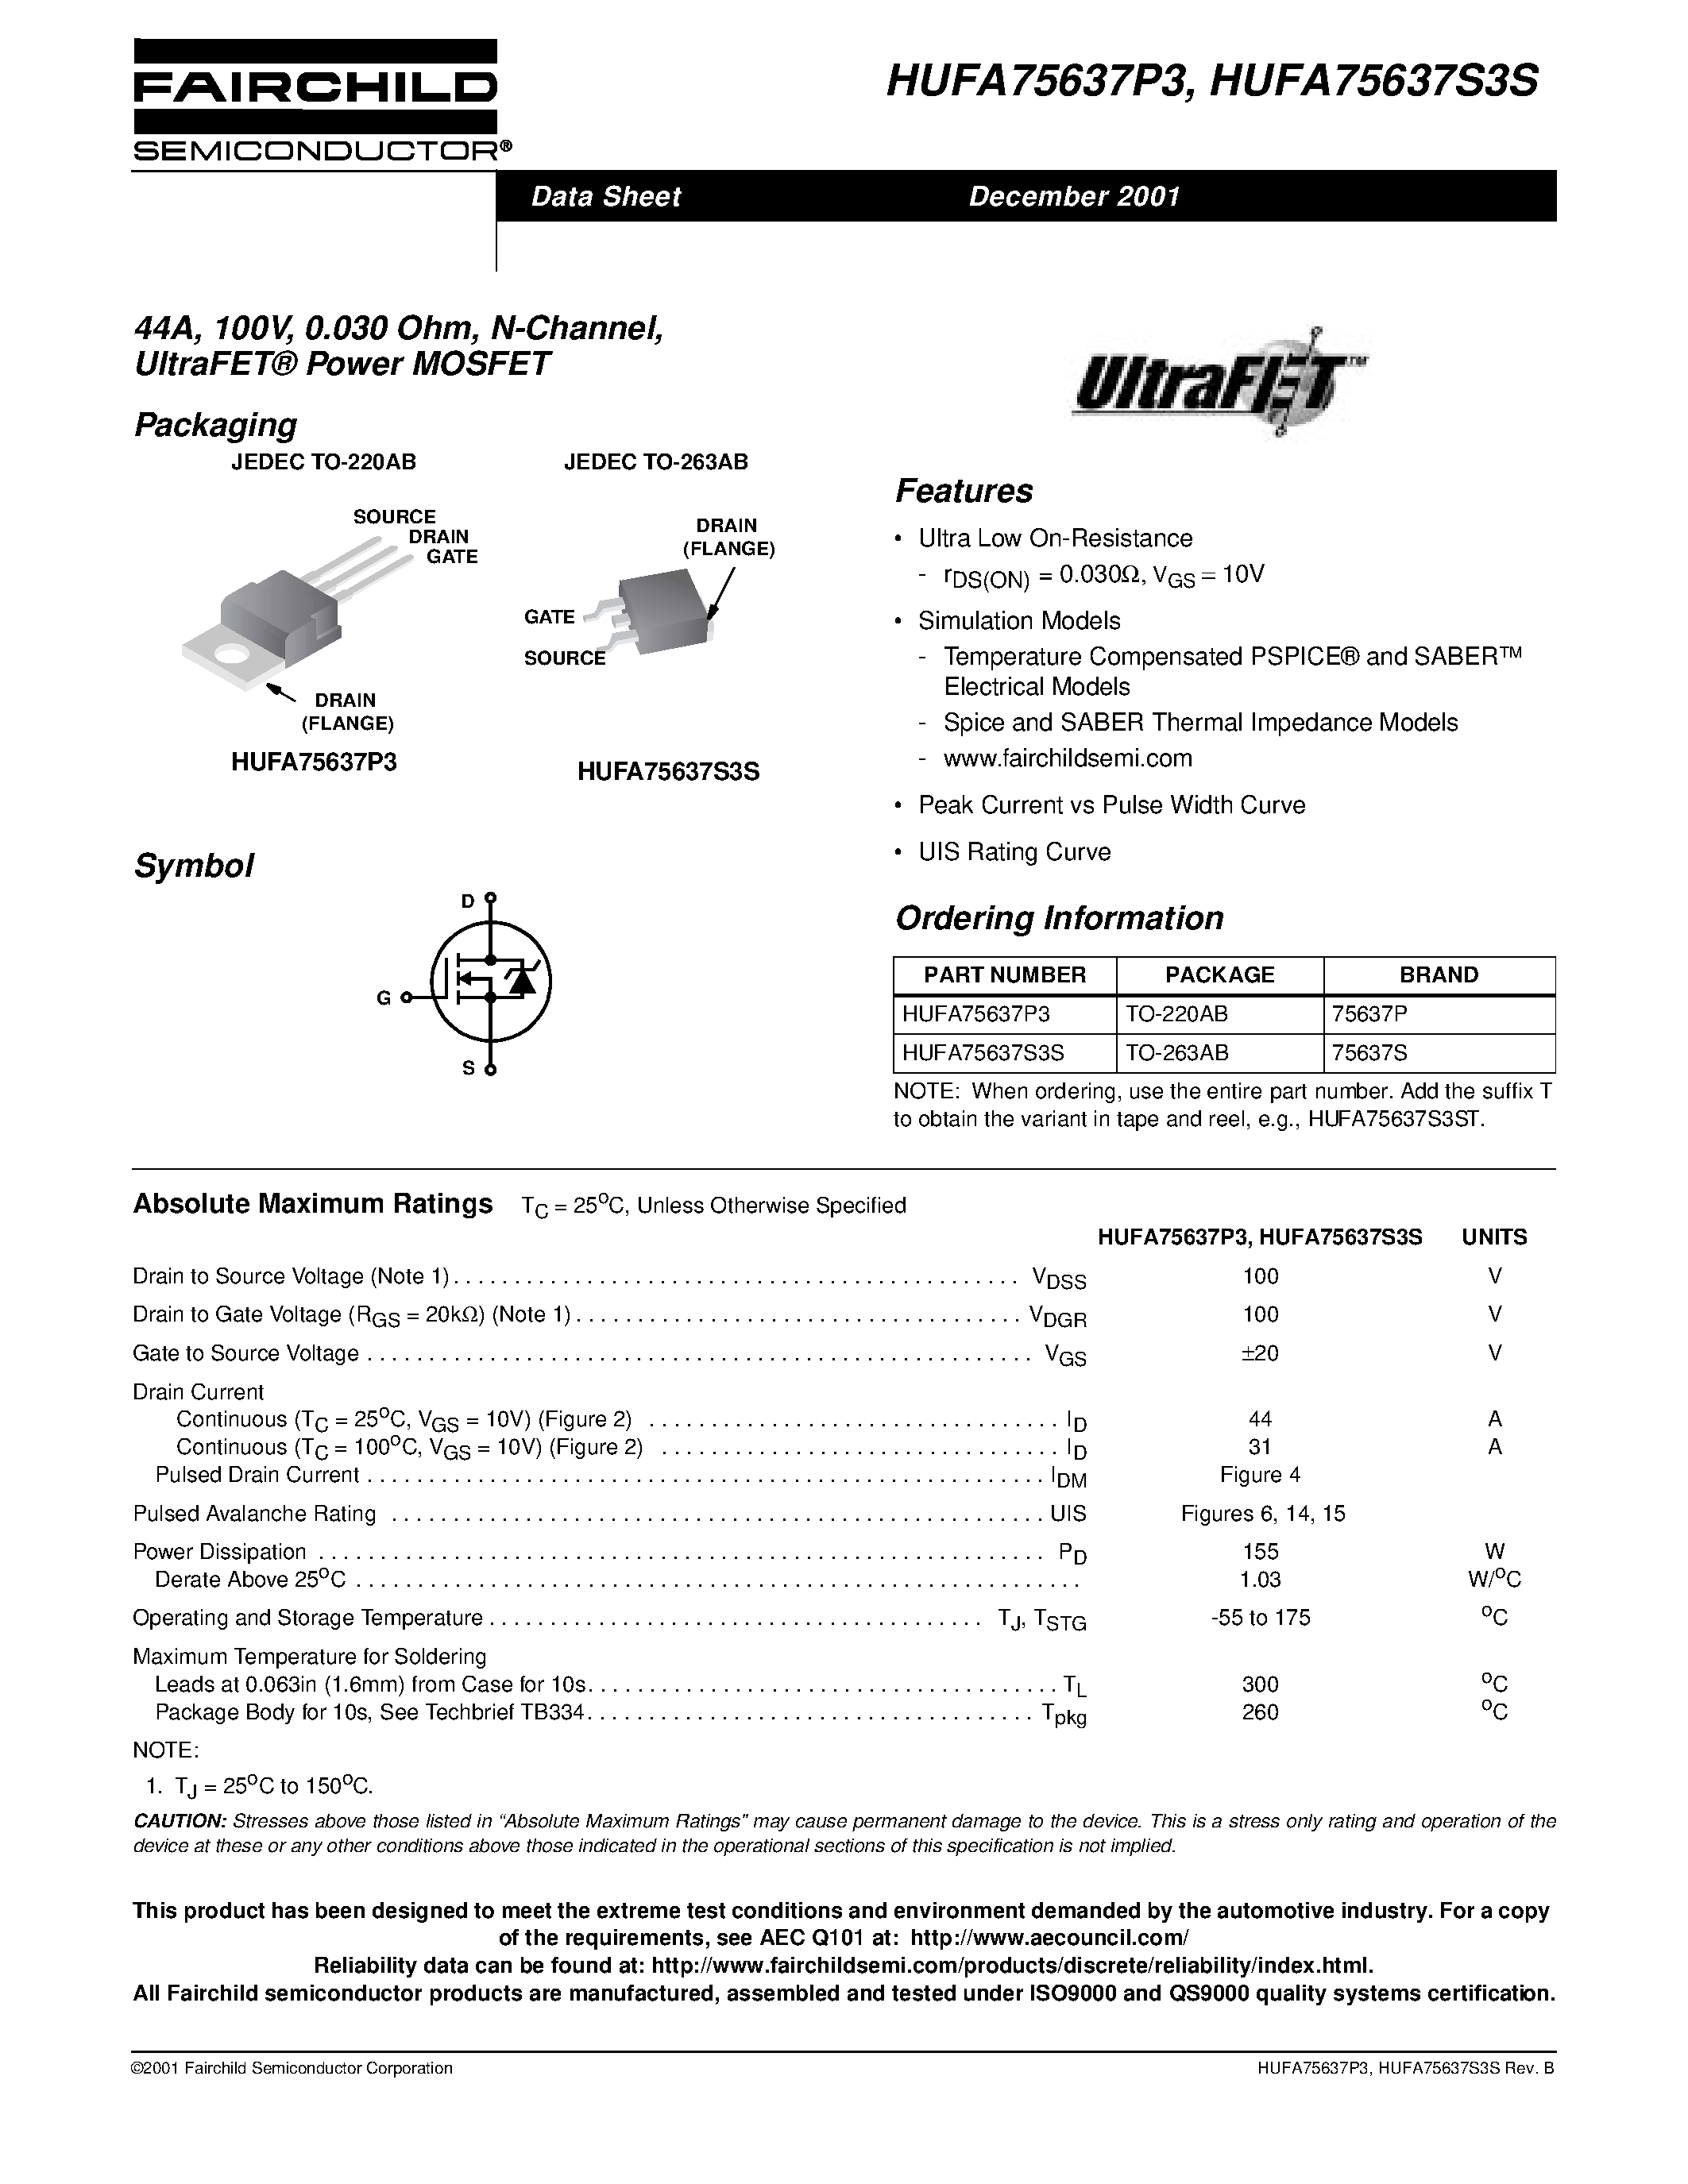 Datasheet HUFA75637S3S - 44A/ 100V/ 0.030 Ohm/ N-Channel/ UltraFET Power MOSFET page 1